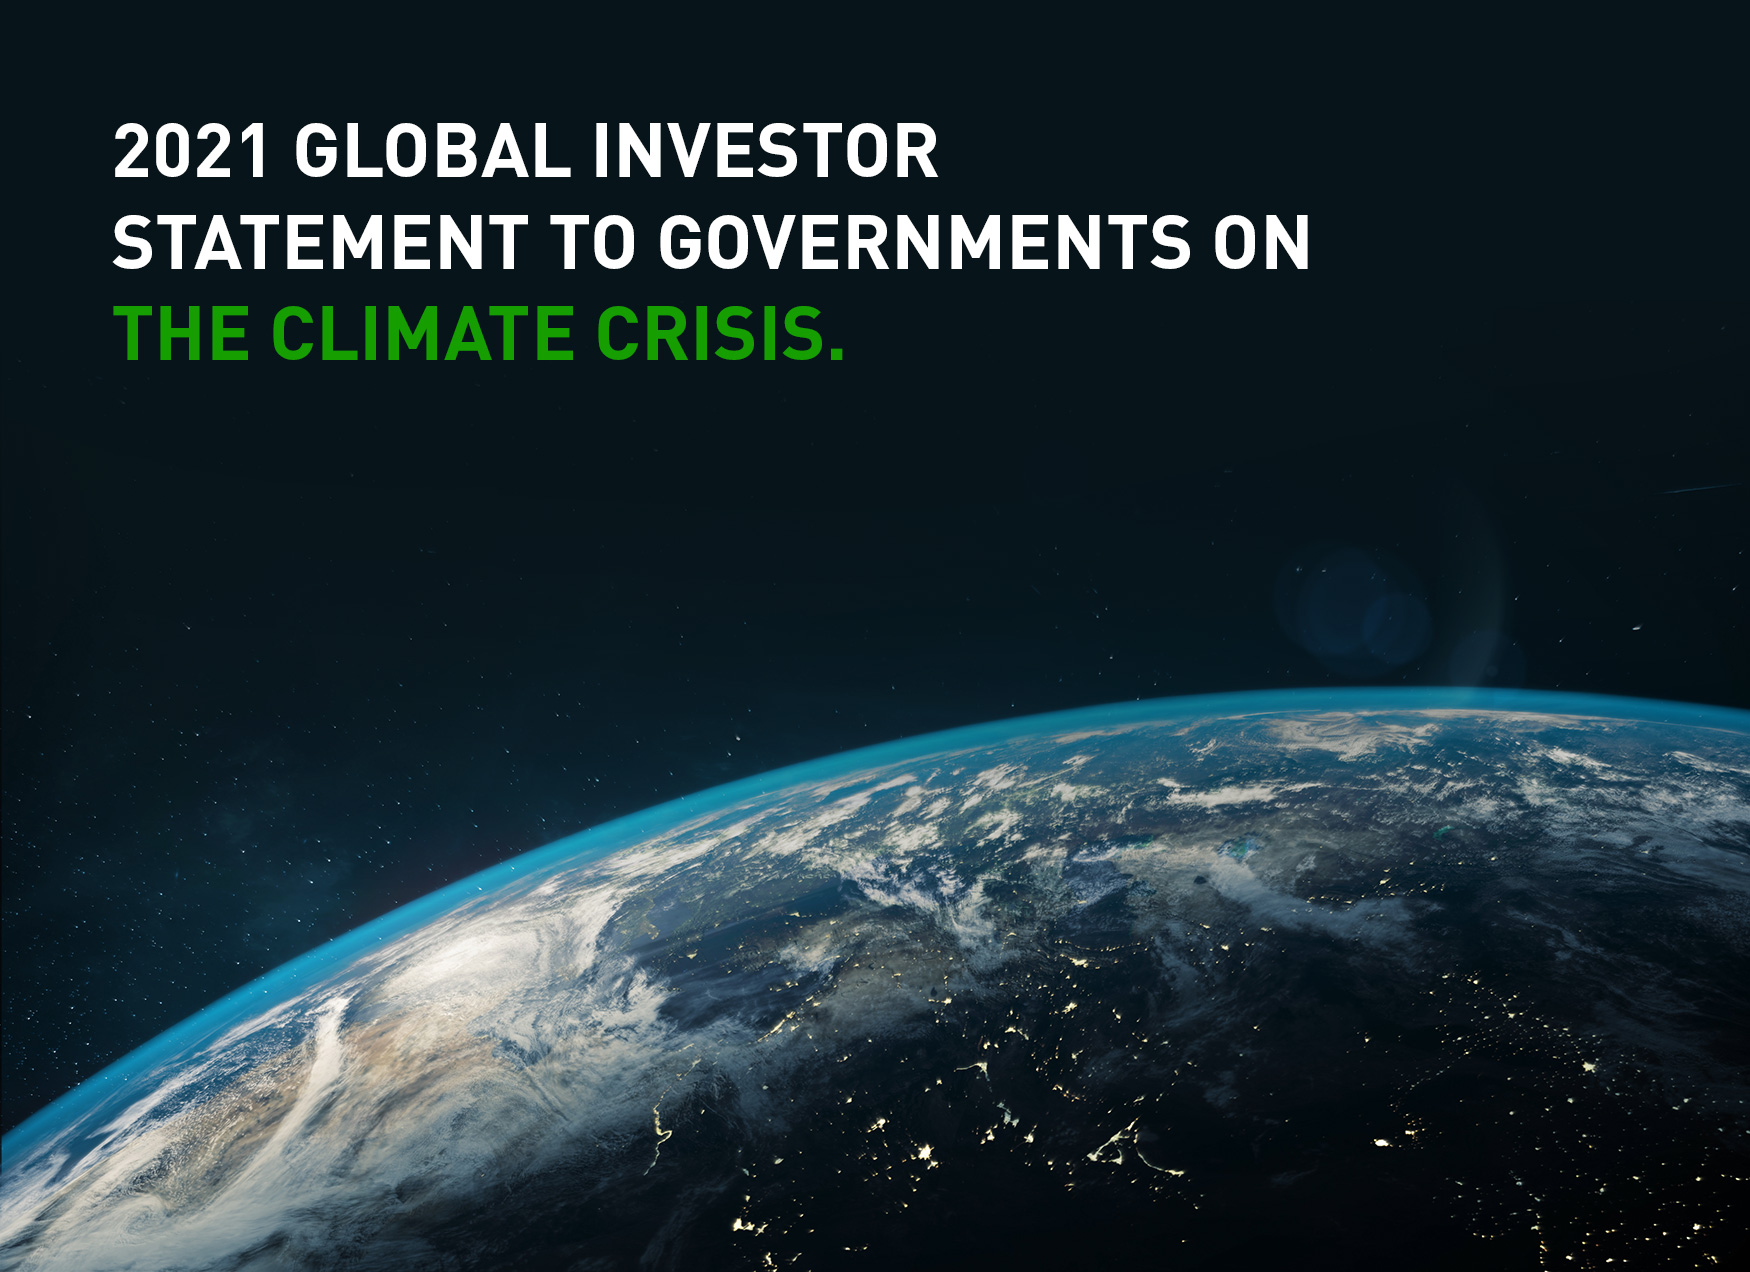 Altis Property Partners urges Governments to rapidly scale up their climate ambition